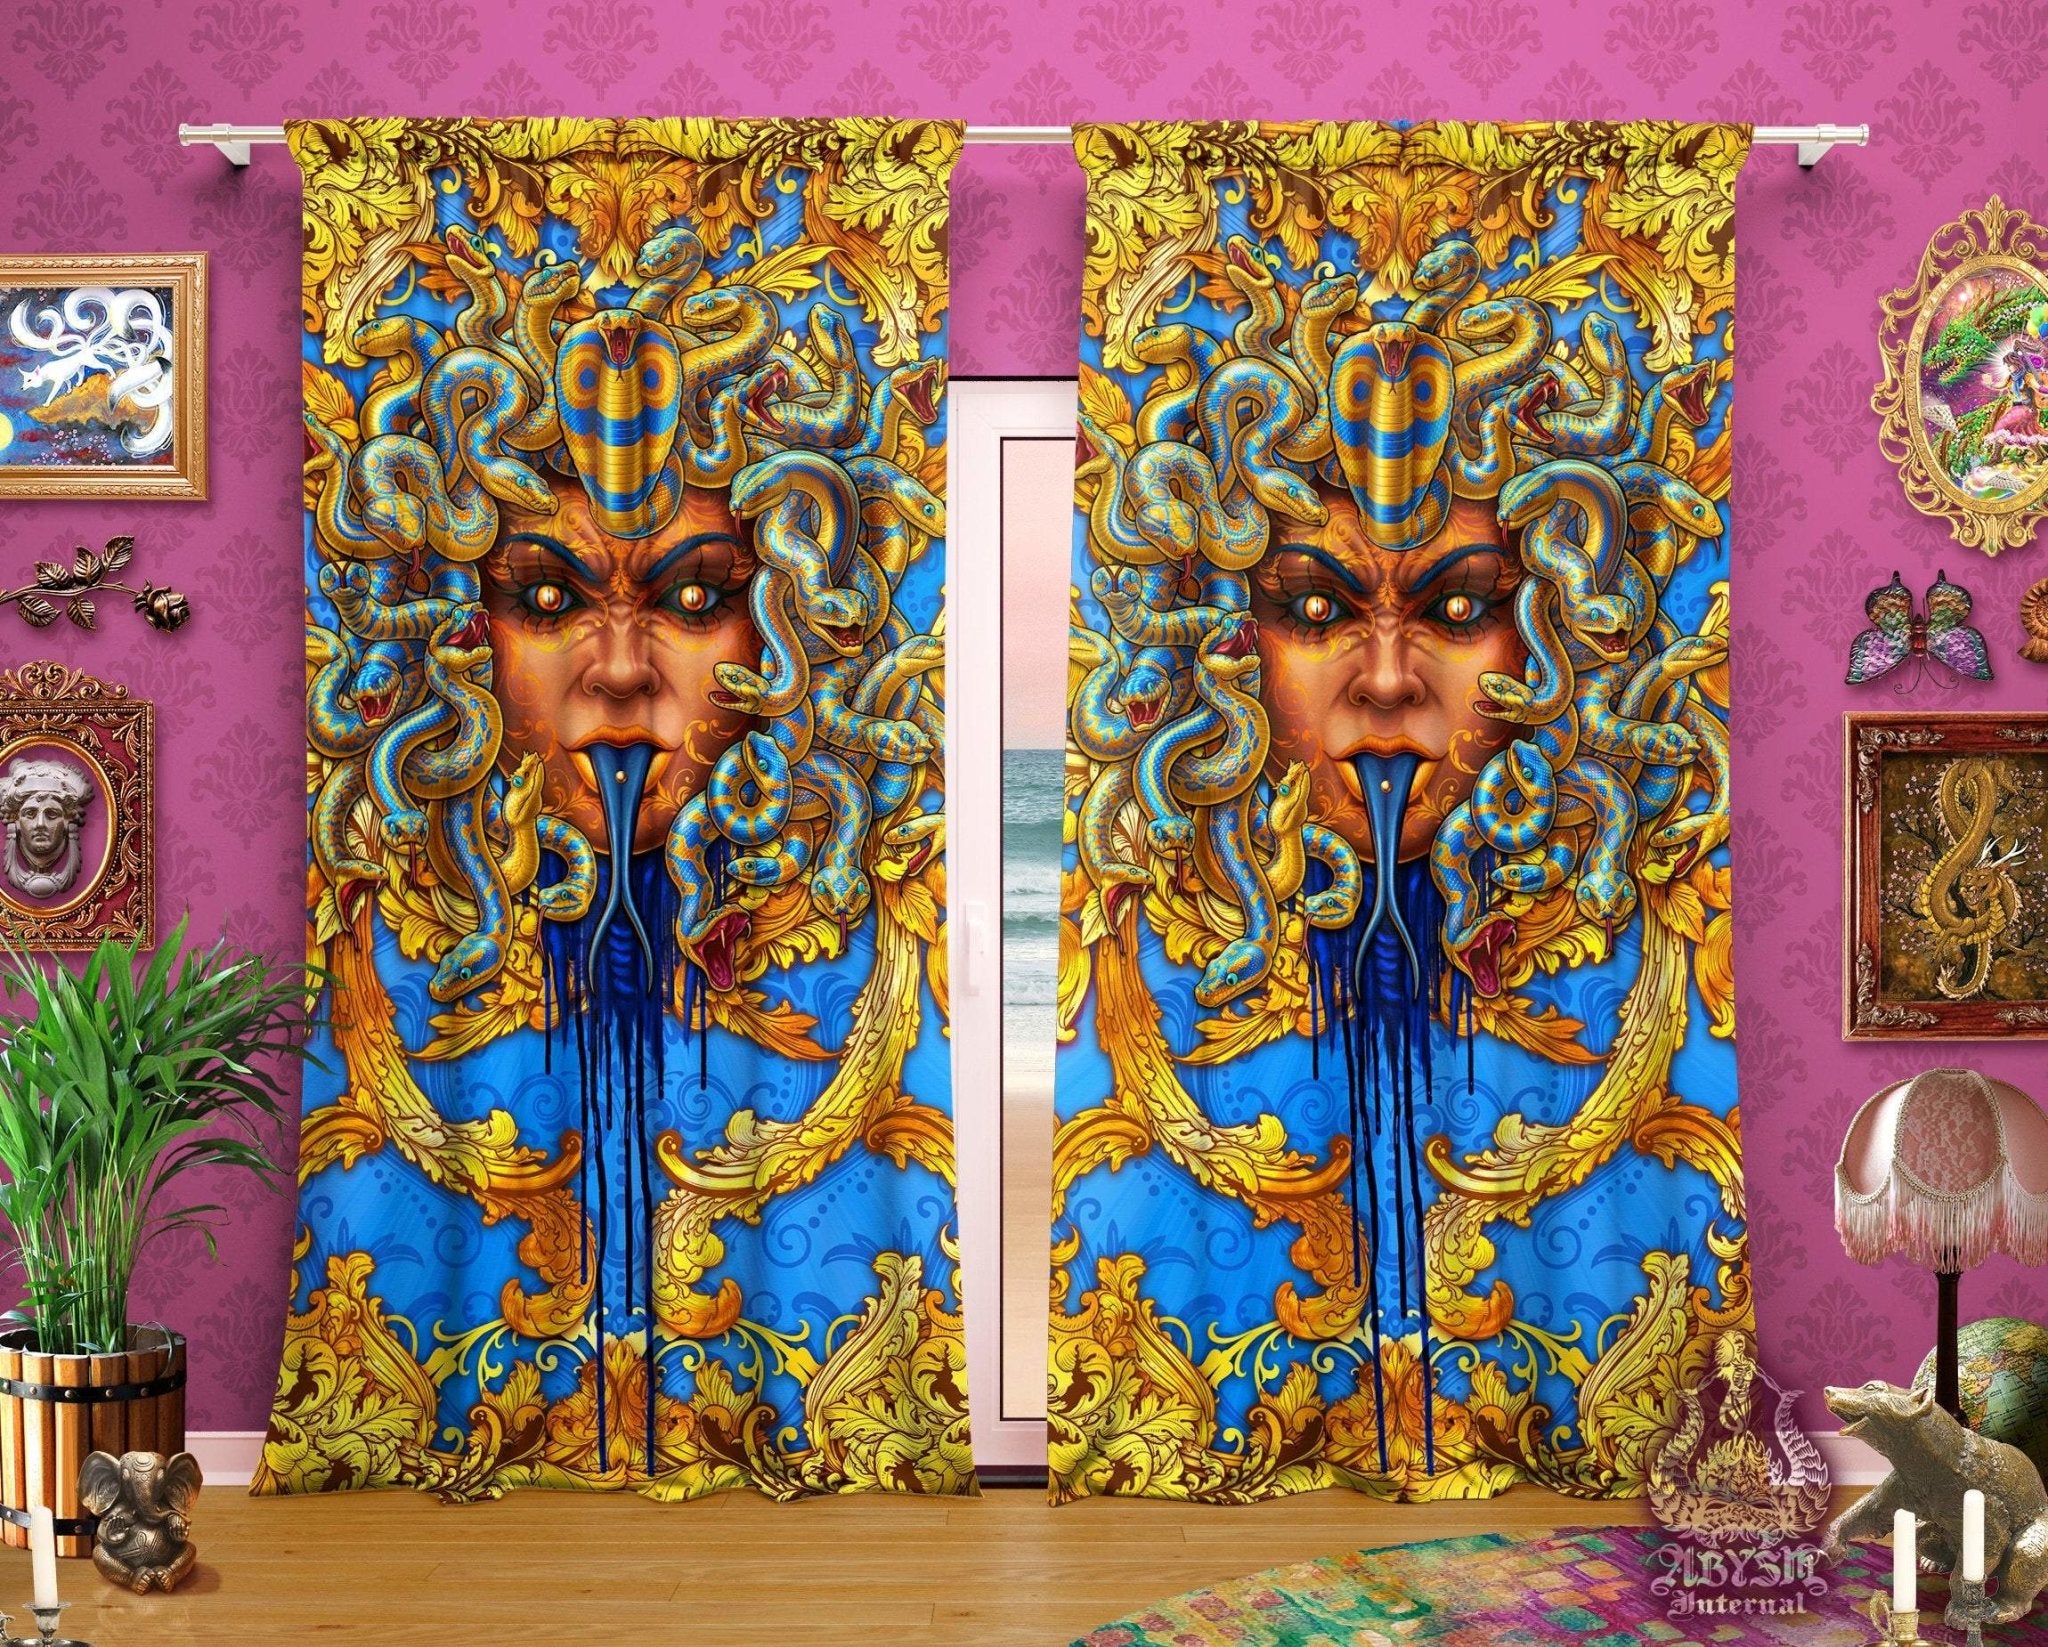 Medusa Blackout Curtains, Long Window Panels, Baroque Art Print, Vintage Room Decor, Funky and Eclectic Home Decor - Cyan & Gold Snakes - Abysm Internal